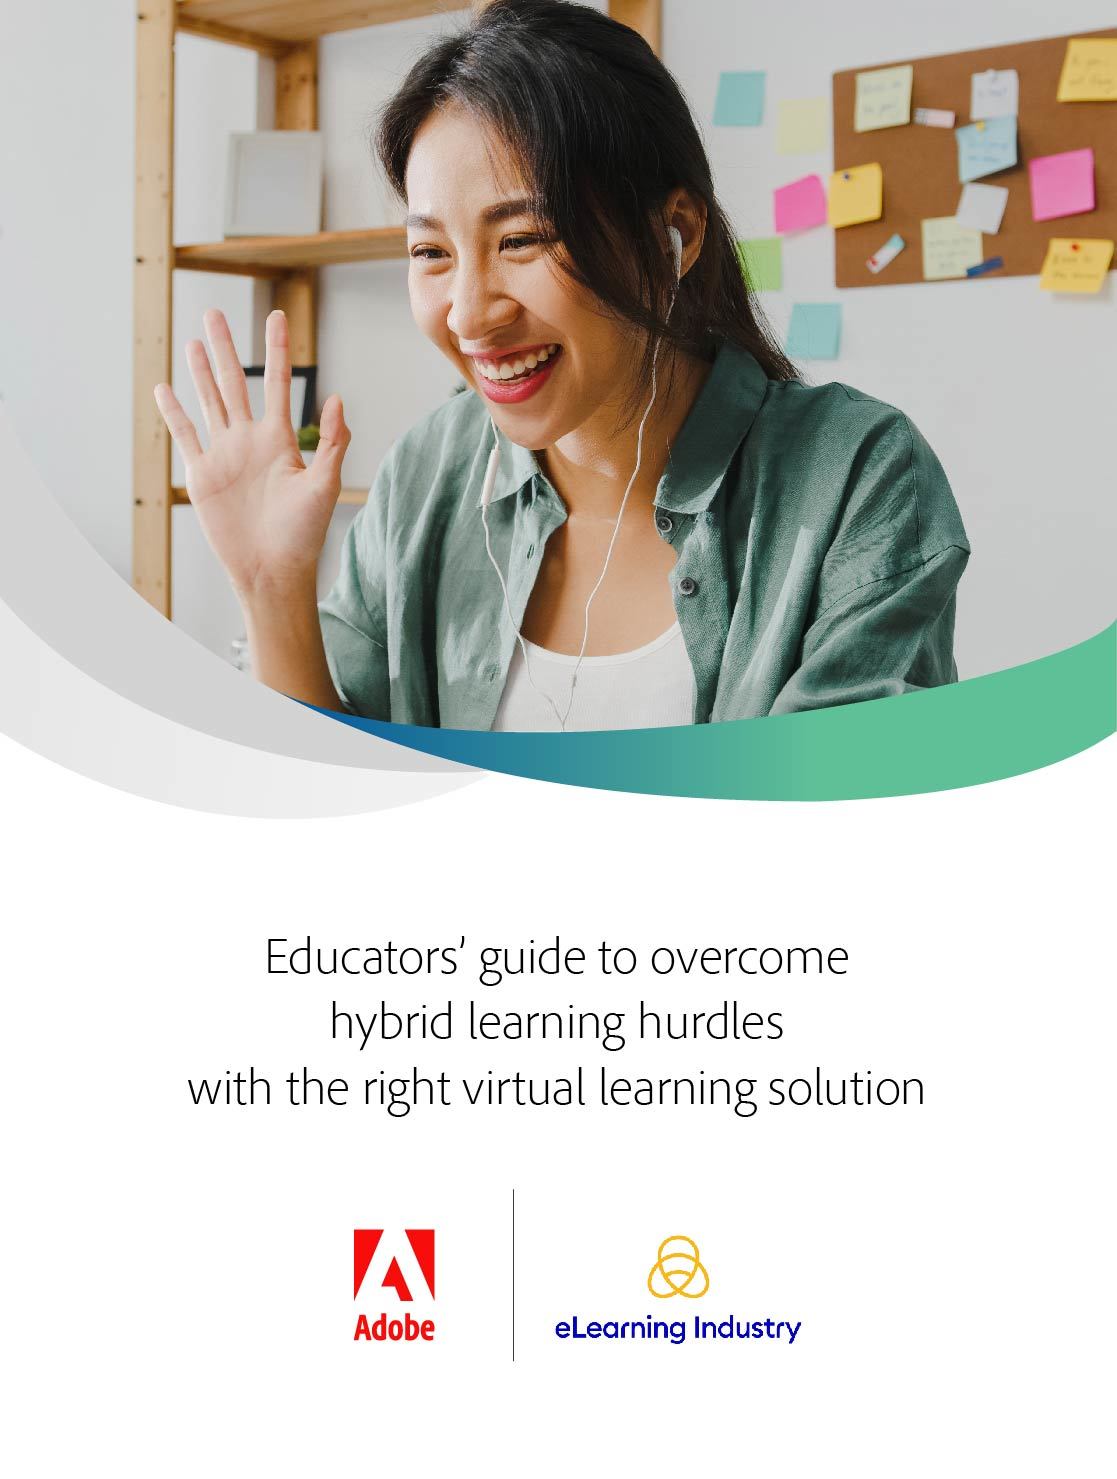 Educators’ Guide To Overcome Hybrid Learning Hurdles With The Right Virtual Learning Solution